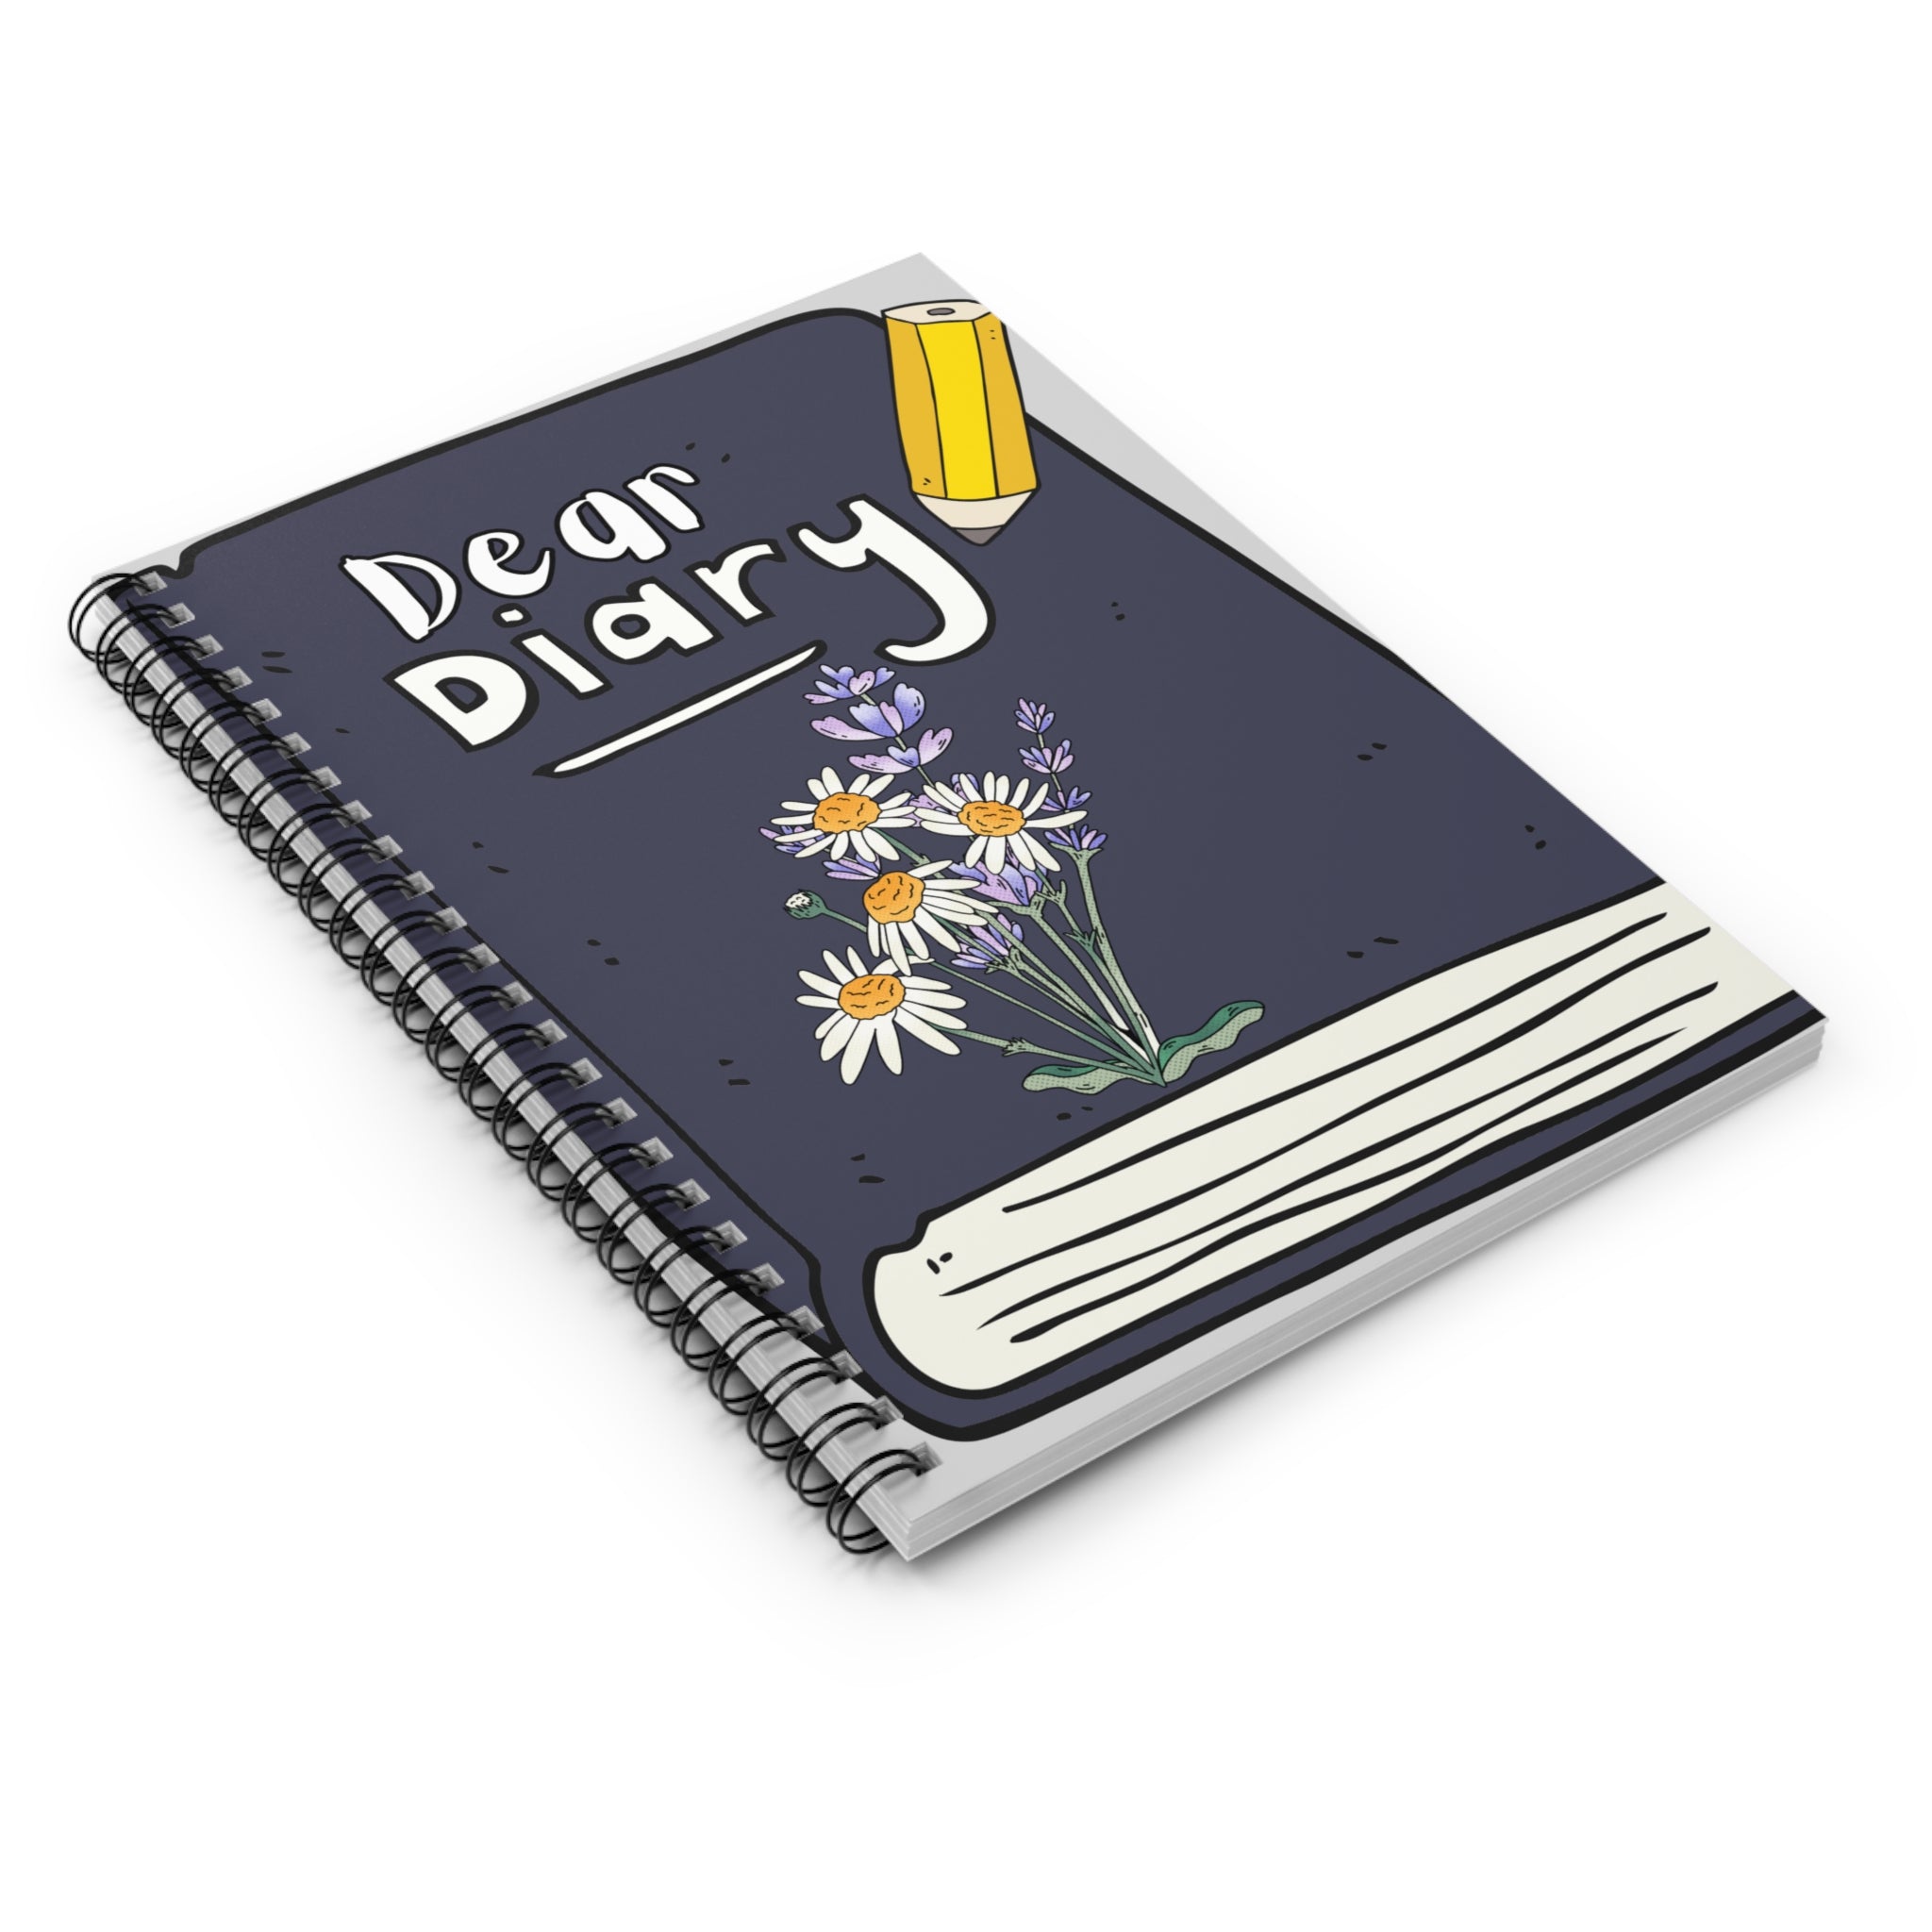 Dear Diary Spiral Notebook - Ruled Line Paper products Krazy Heart Designs Boutique   